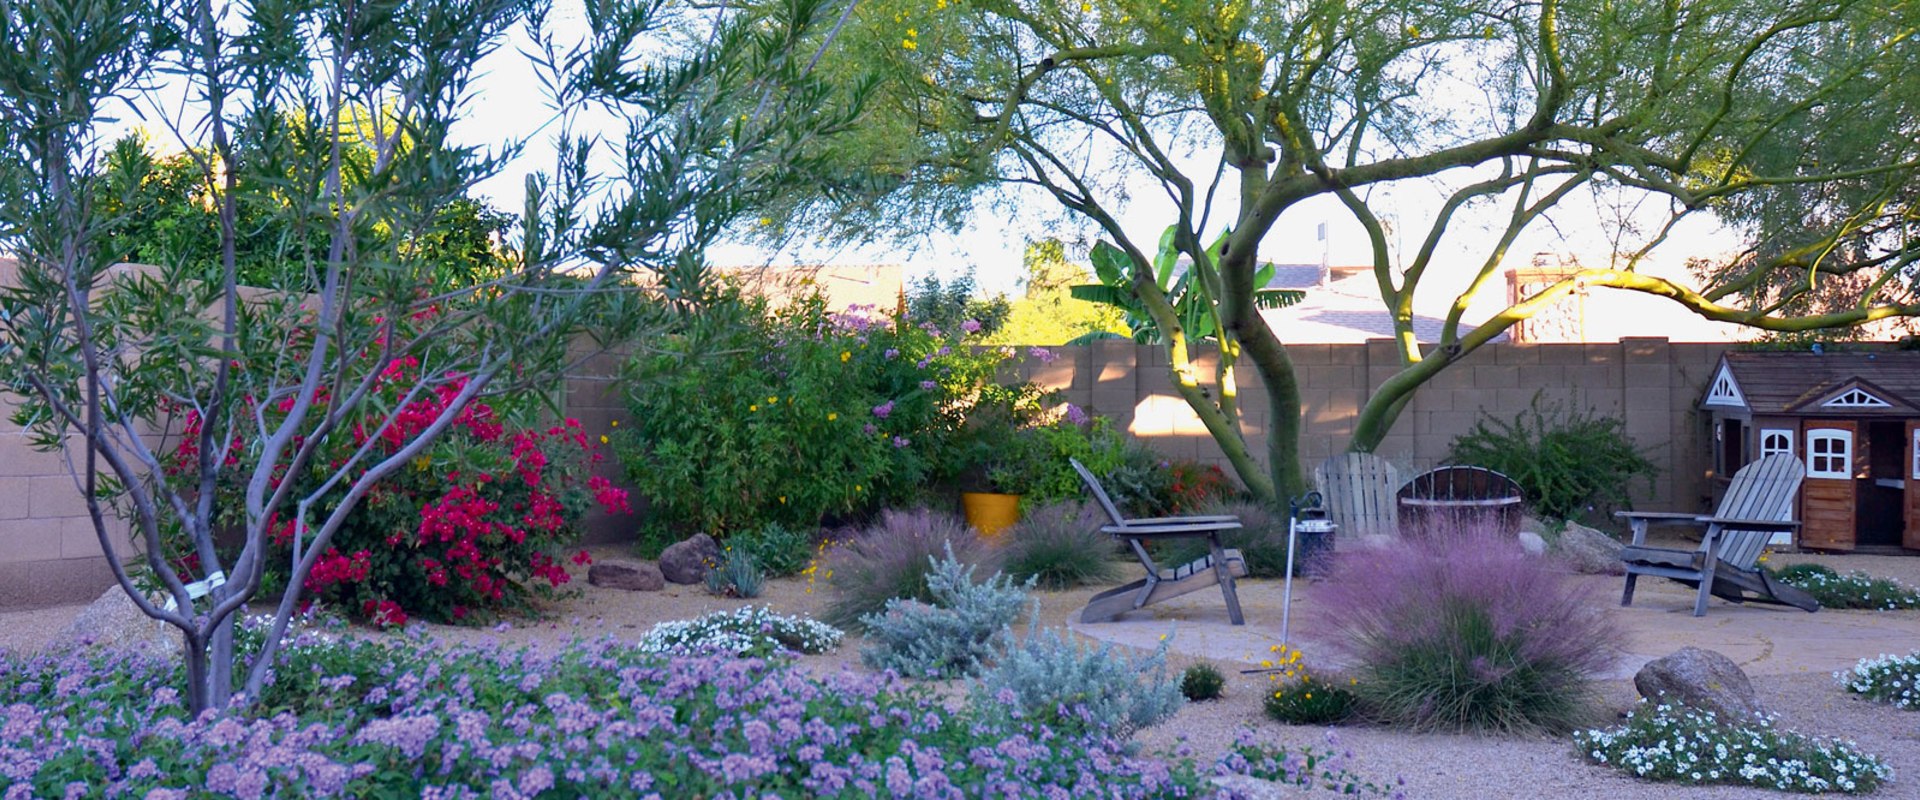 Maintaining a Xeriscape Landscape: Tips and Tricks for a Beautiful, Low-Maintenance Garden